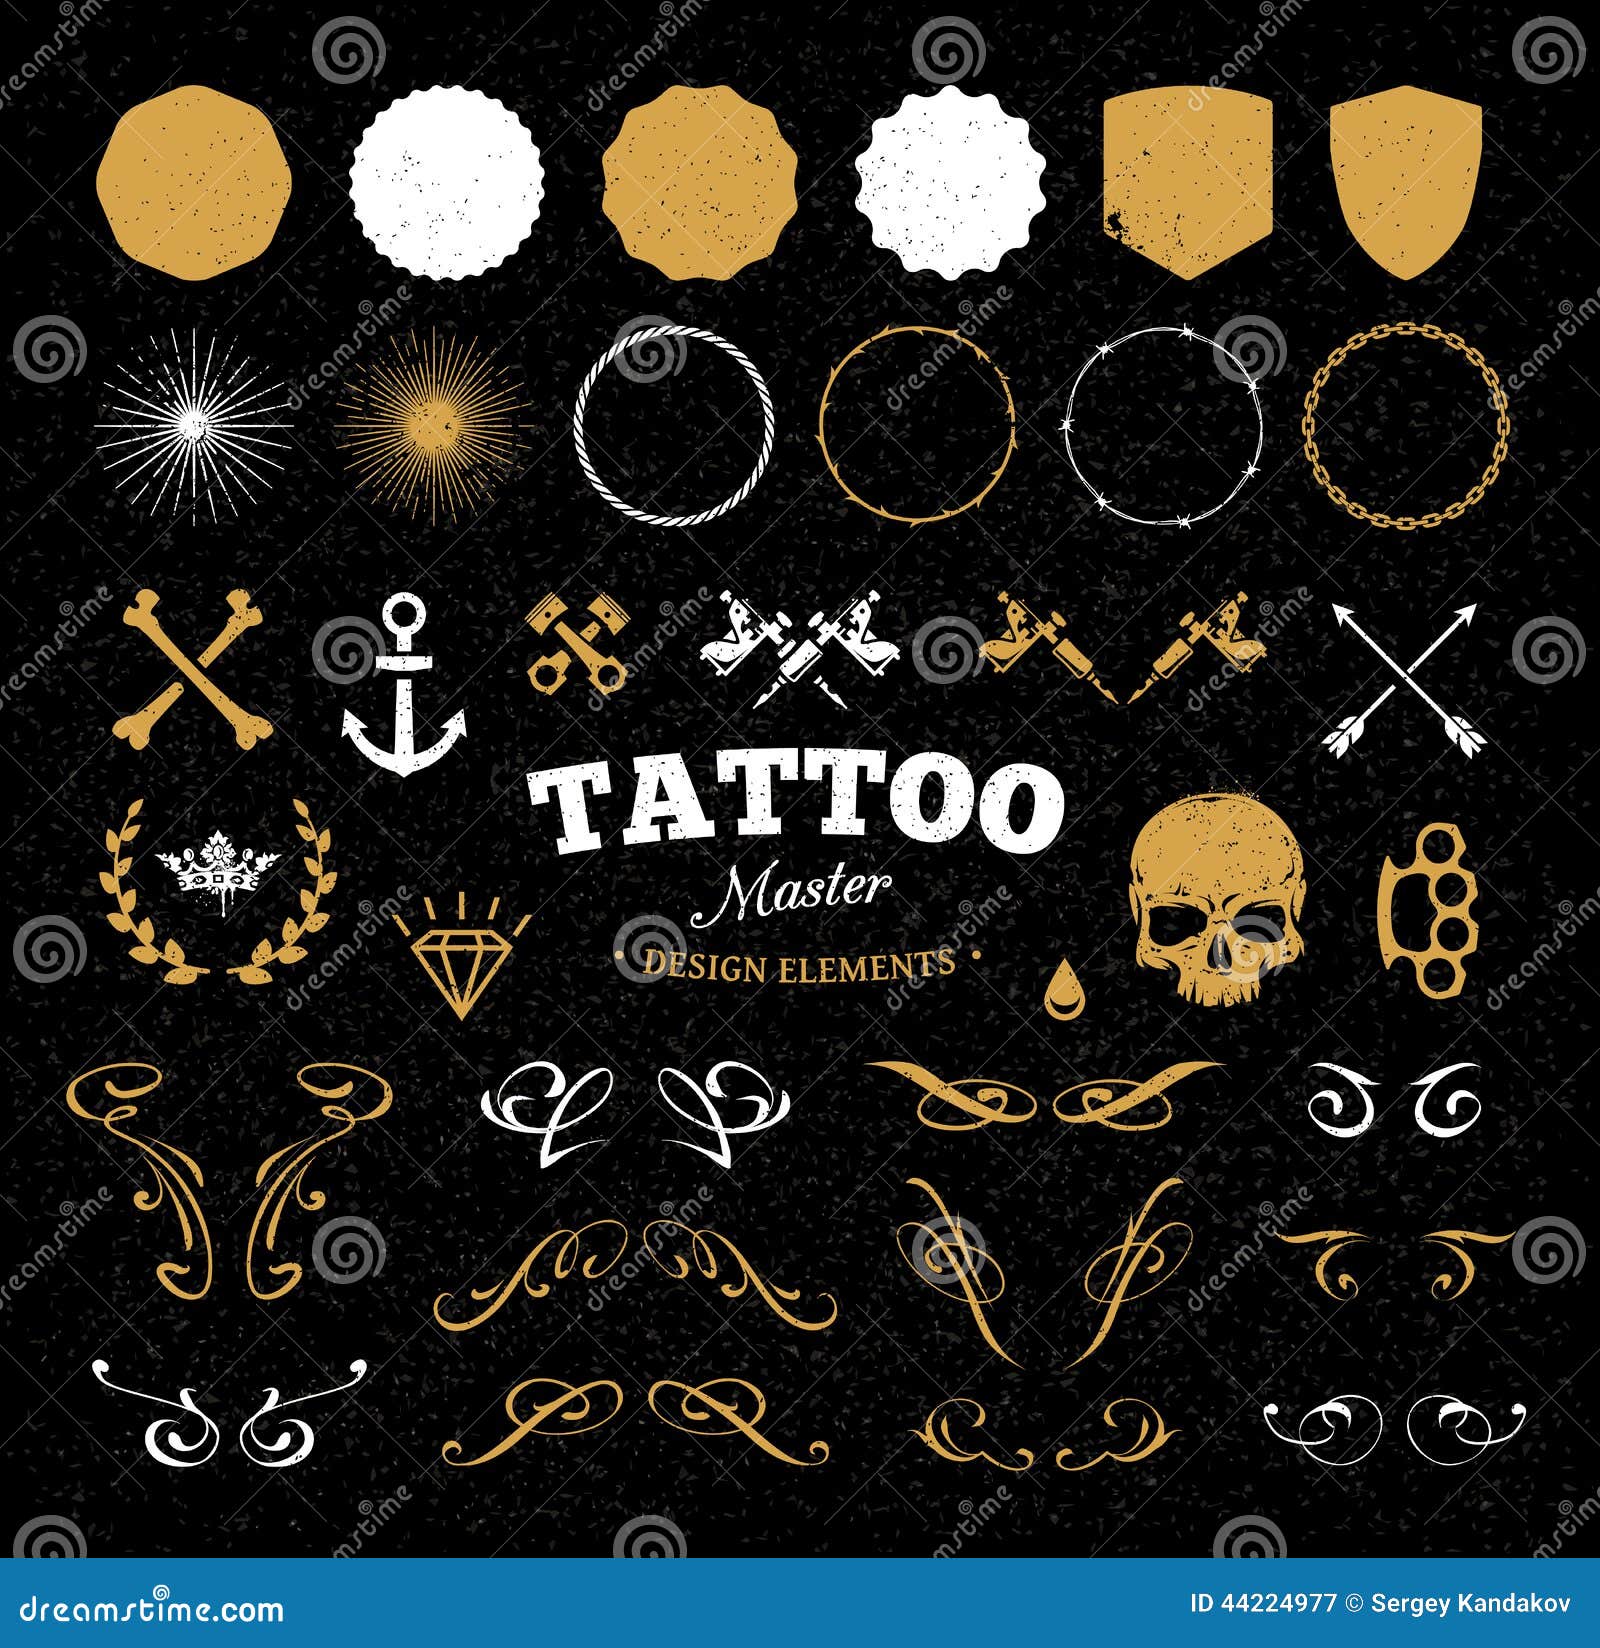 40 Letter T Tattoo Designs Ideas and Templates  Tattoo Me Now